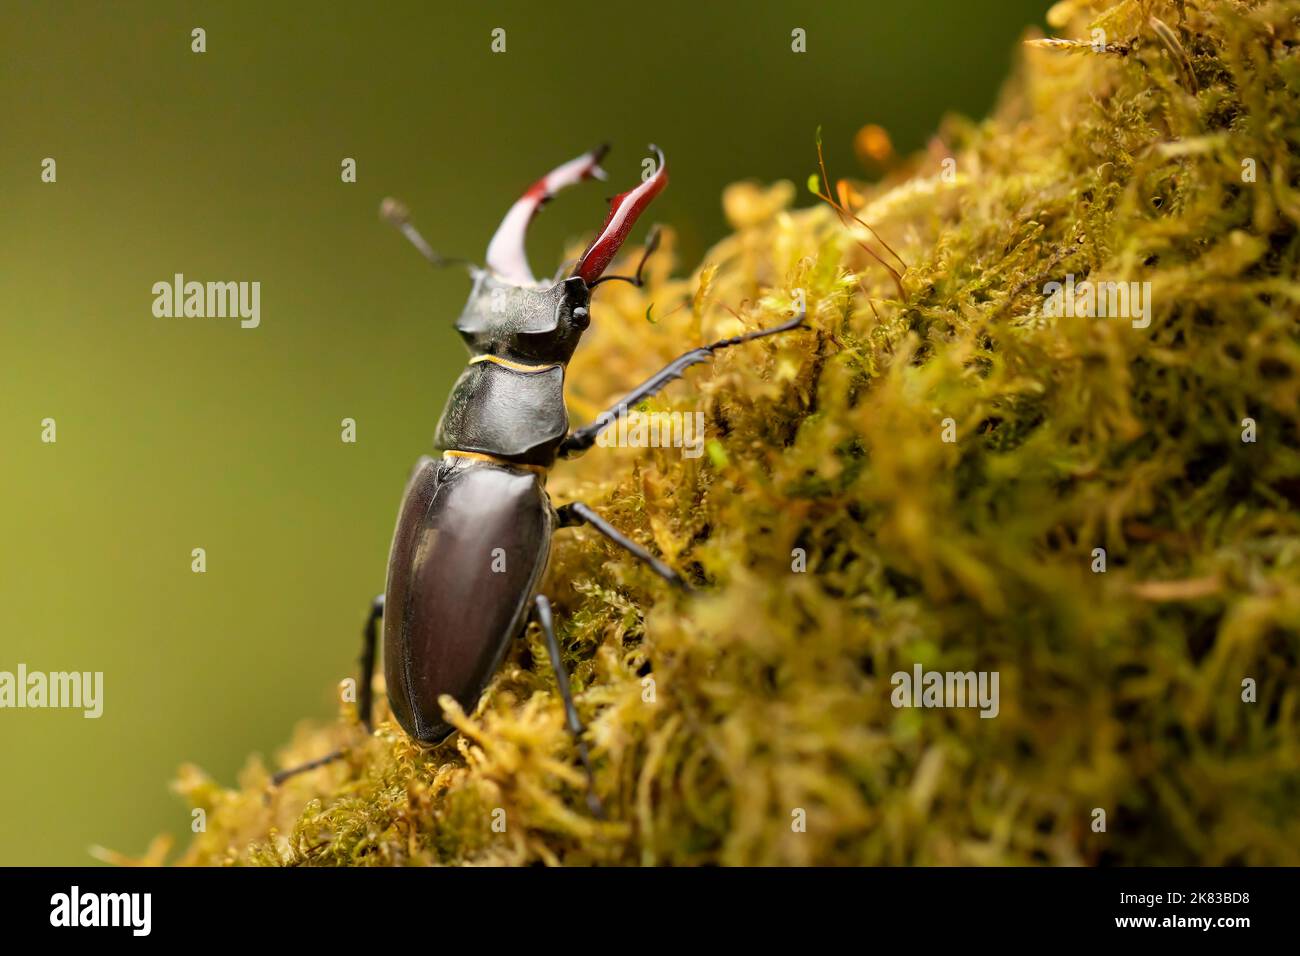 Male stag beetle, Lucanus cervus, with enlarge mandible on mossy tree, largest beetle in Europe Stock Photo